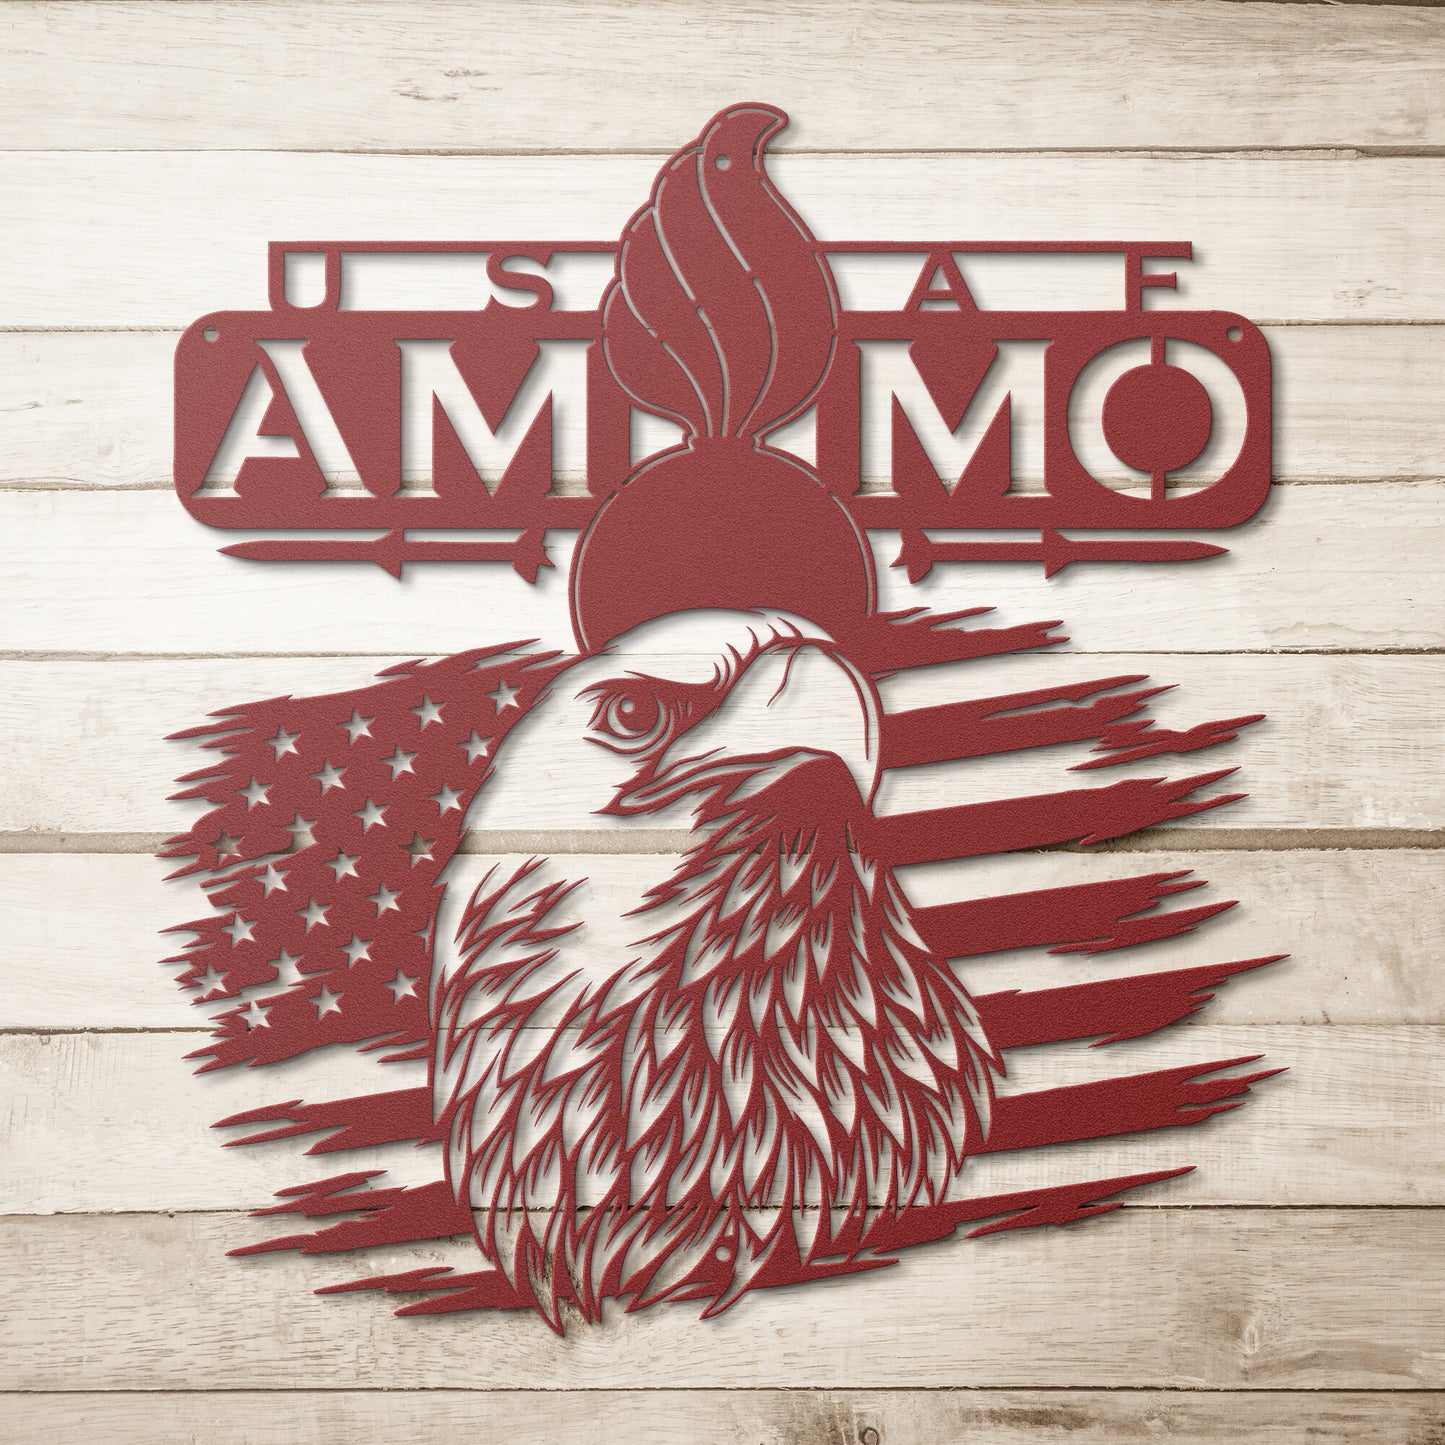 USAF AMMO Eagle Head American Flag Pisspot Missile Silhouettes Die Cut Hanging Metal Wall Sign